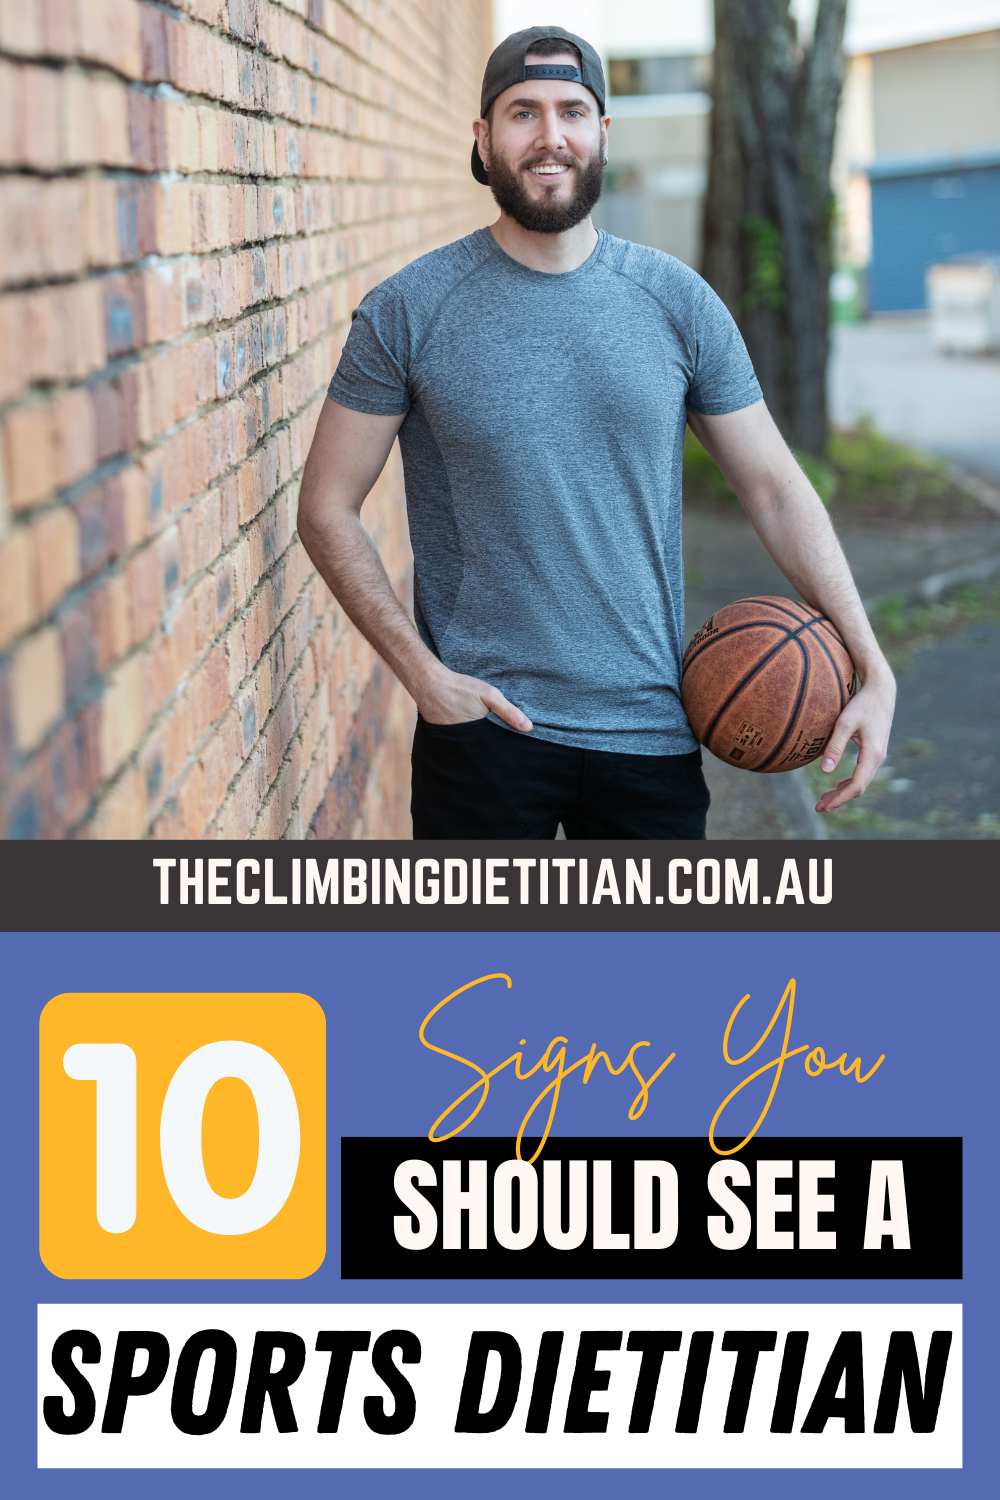 10 Signs To See A Sports Dietitian- Nutritionist - Brisbane Dietitian